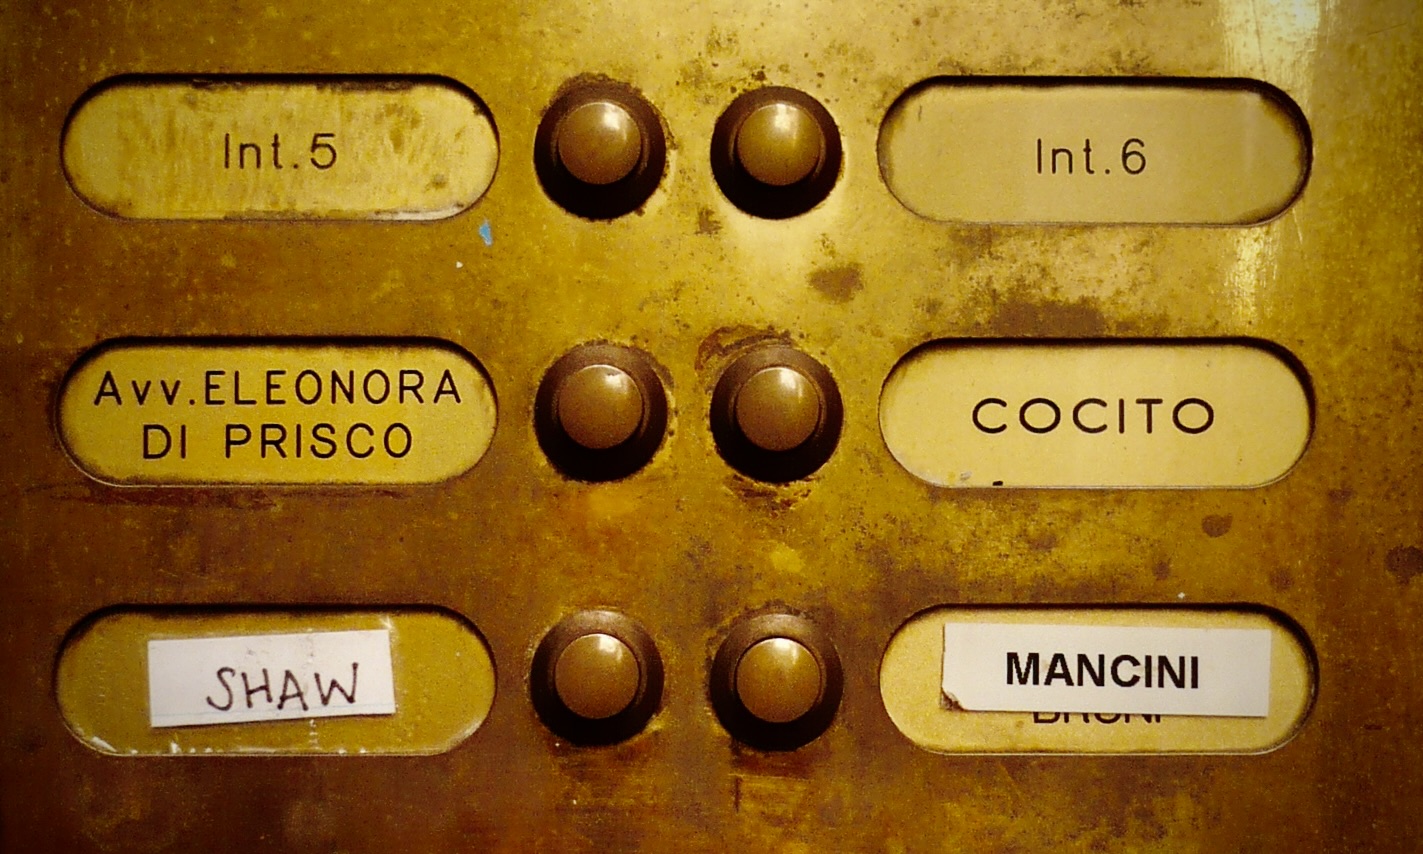 Image of Amanda Shaw's apartment buzzer at her apartment in Rome. Links to a full article on her blog about the publishing of her new book "It Will Have Been So Beautiful".